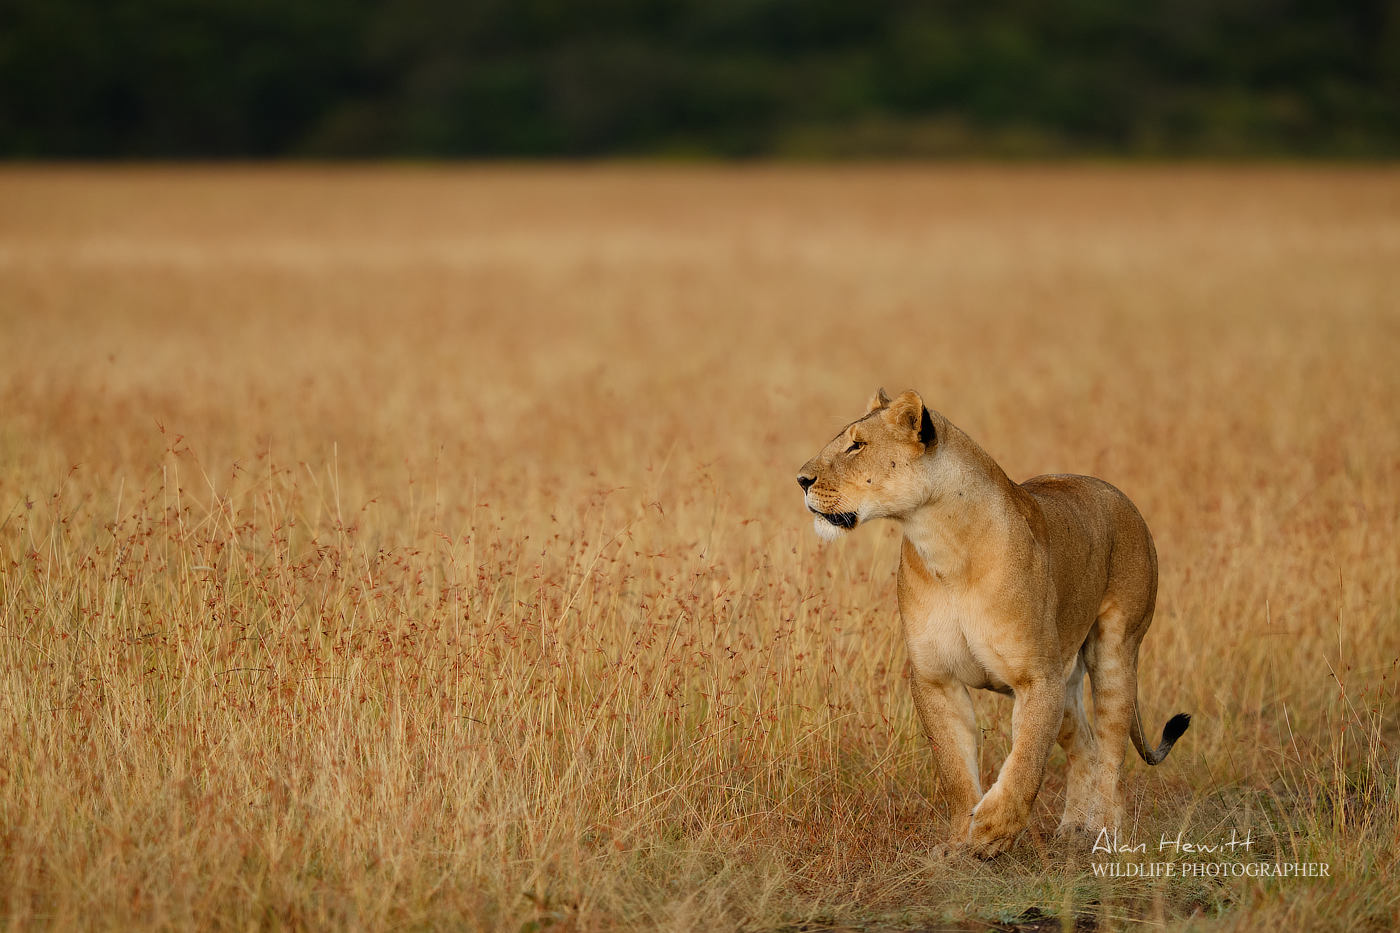 Lioness of the Lemek Pride. Photographed with the Fujifilm X-H1 & Fujinon 200mm f/2 & 1.4x f/2 converter.